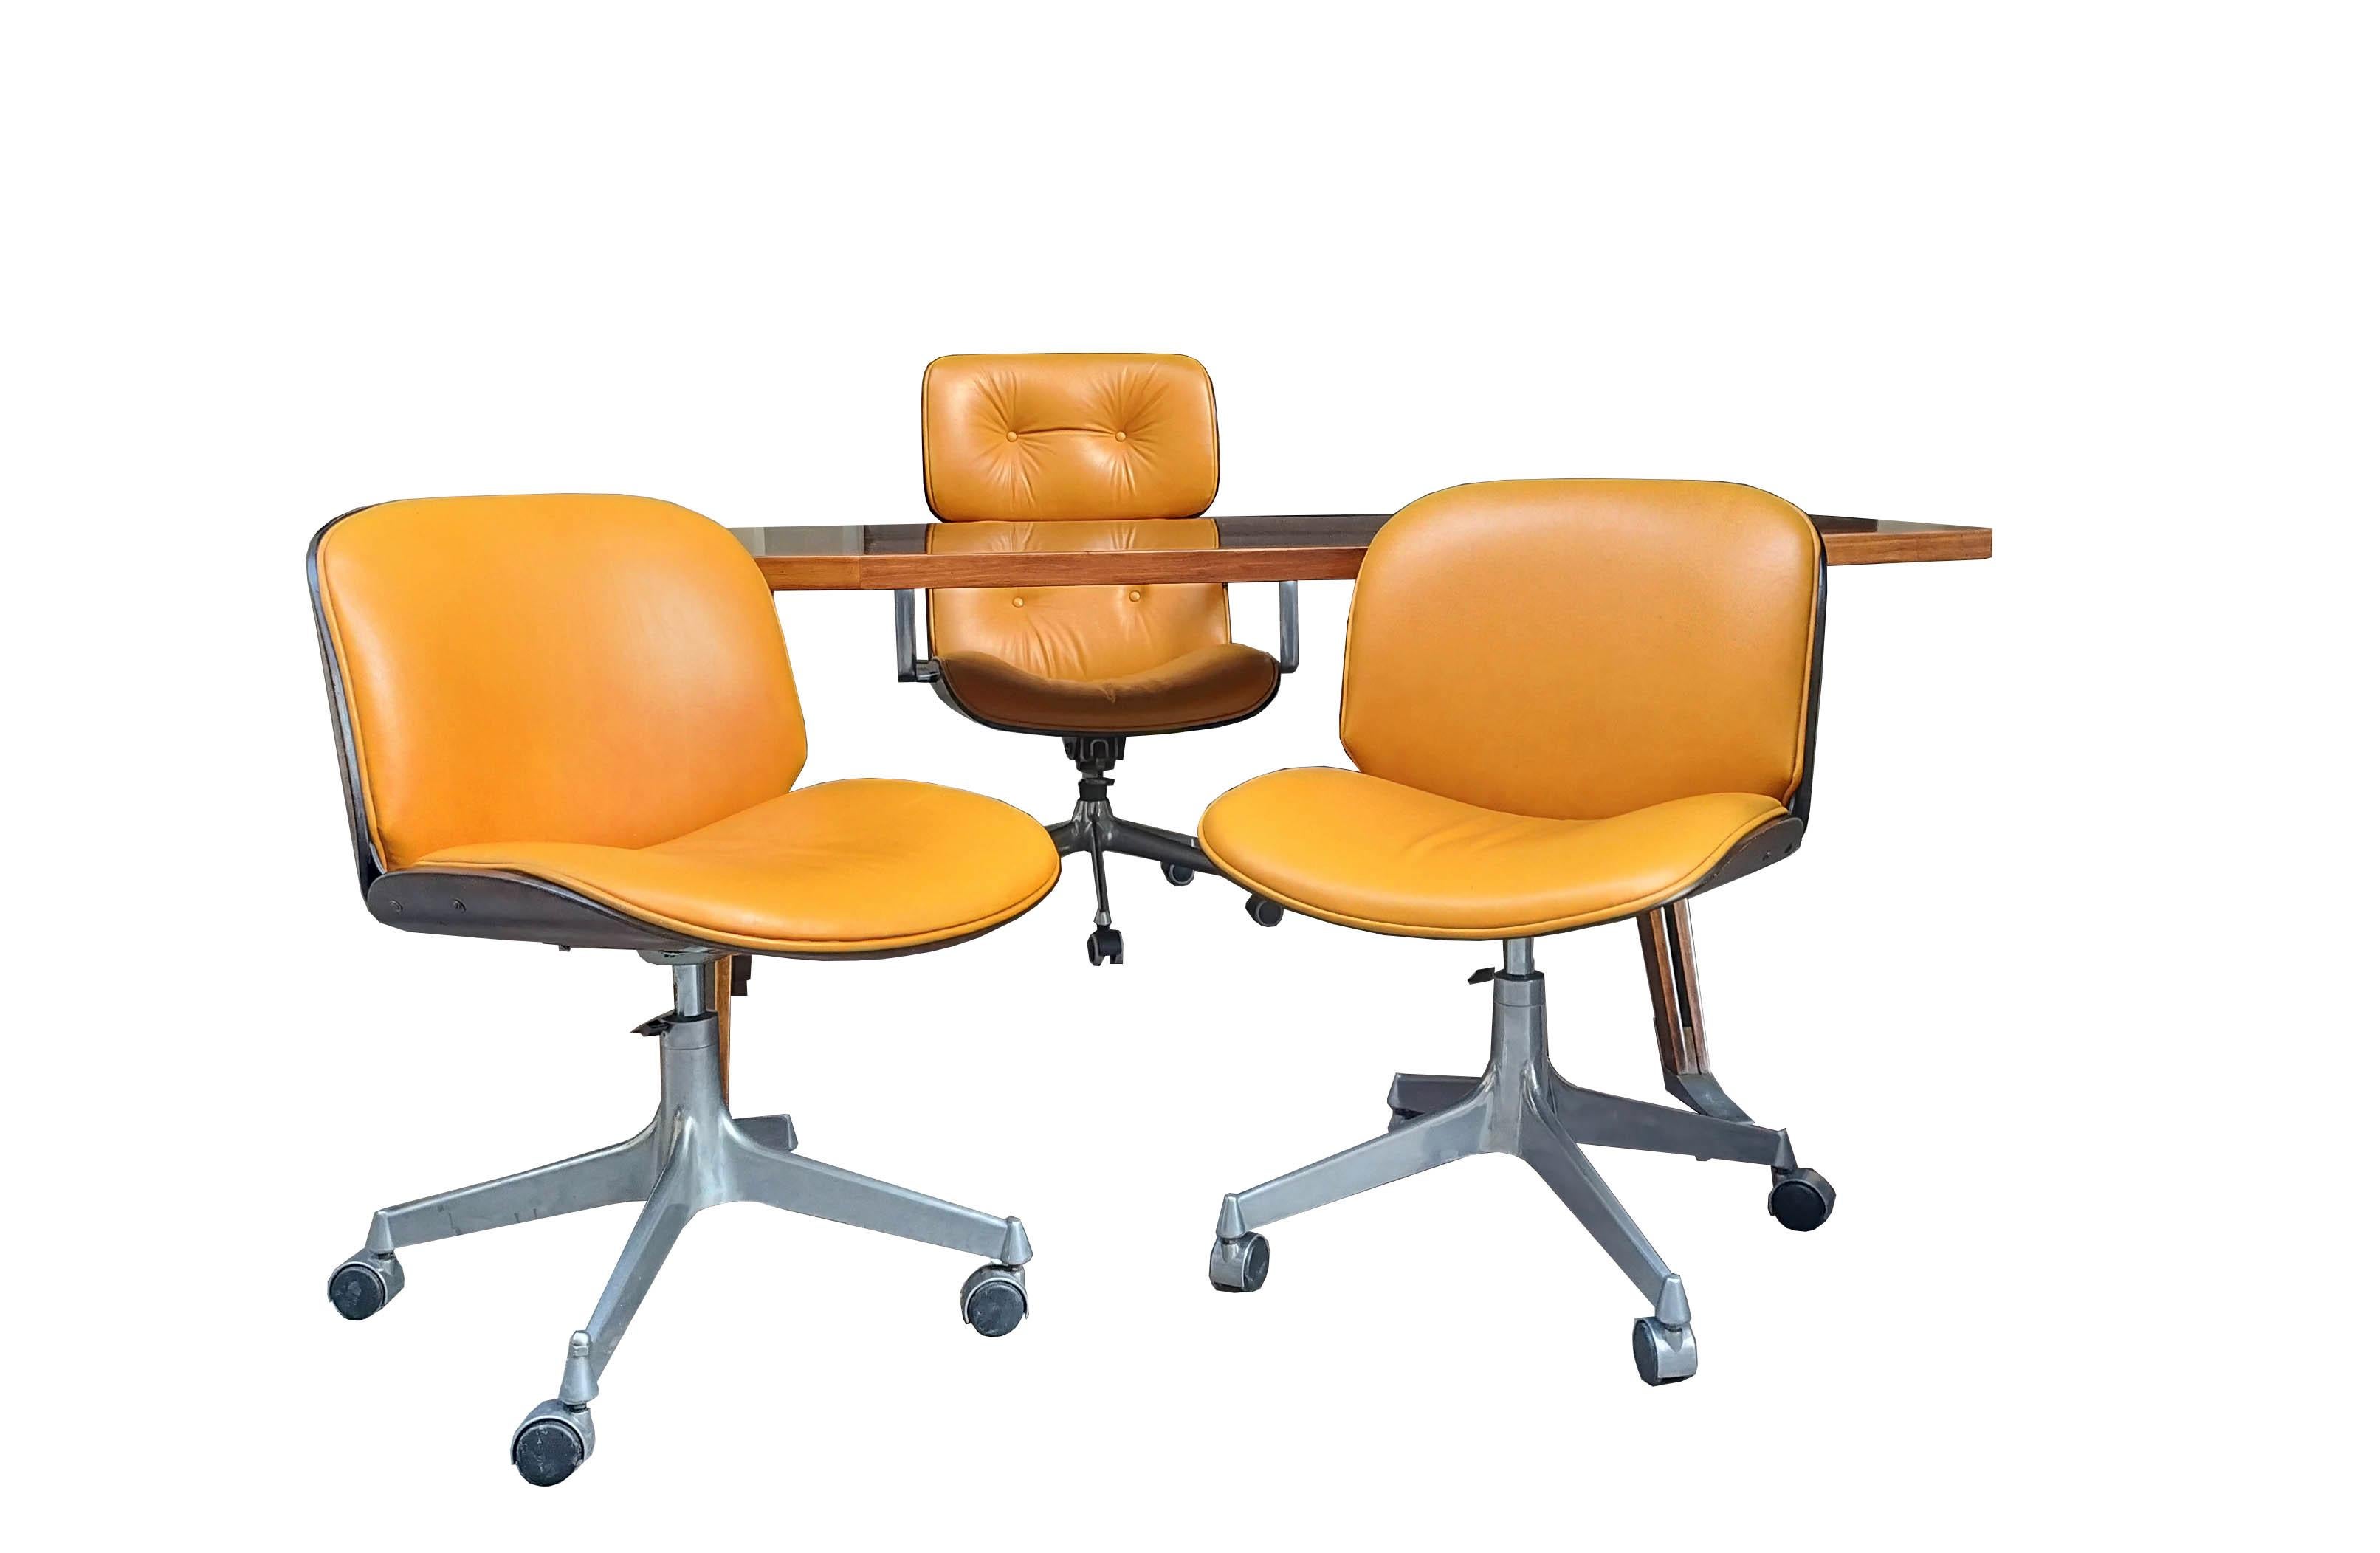 Rare office set designed by Ico Parisi for MIM Roma in the 1950s. Consisting of: Modern swivel desk chair on castors from the Temi series, with four-star cast aluminium base, wood veneer and original imitation leather upholstery; Pair of swivel